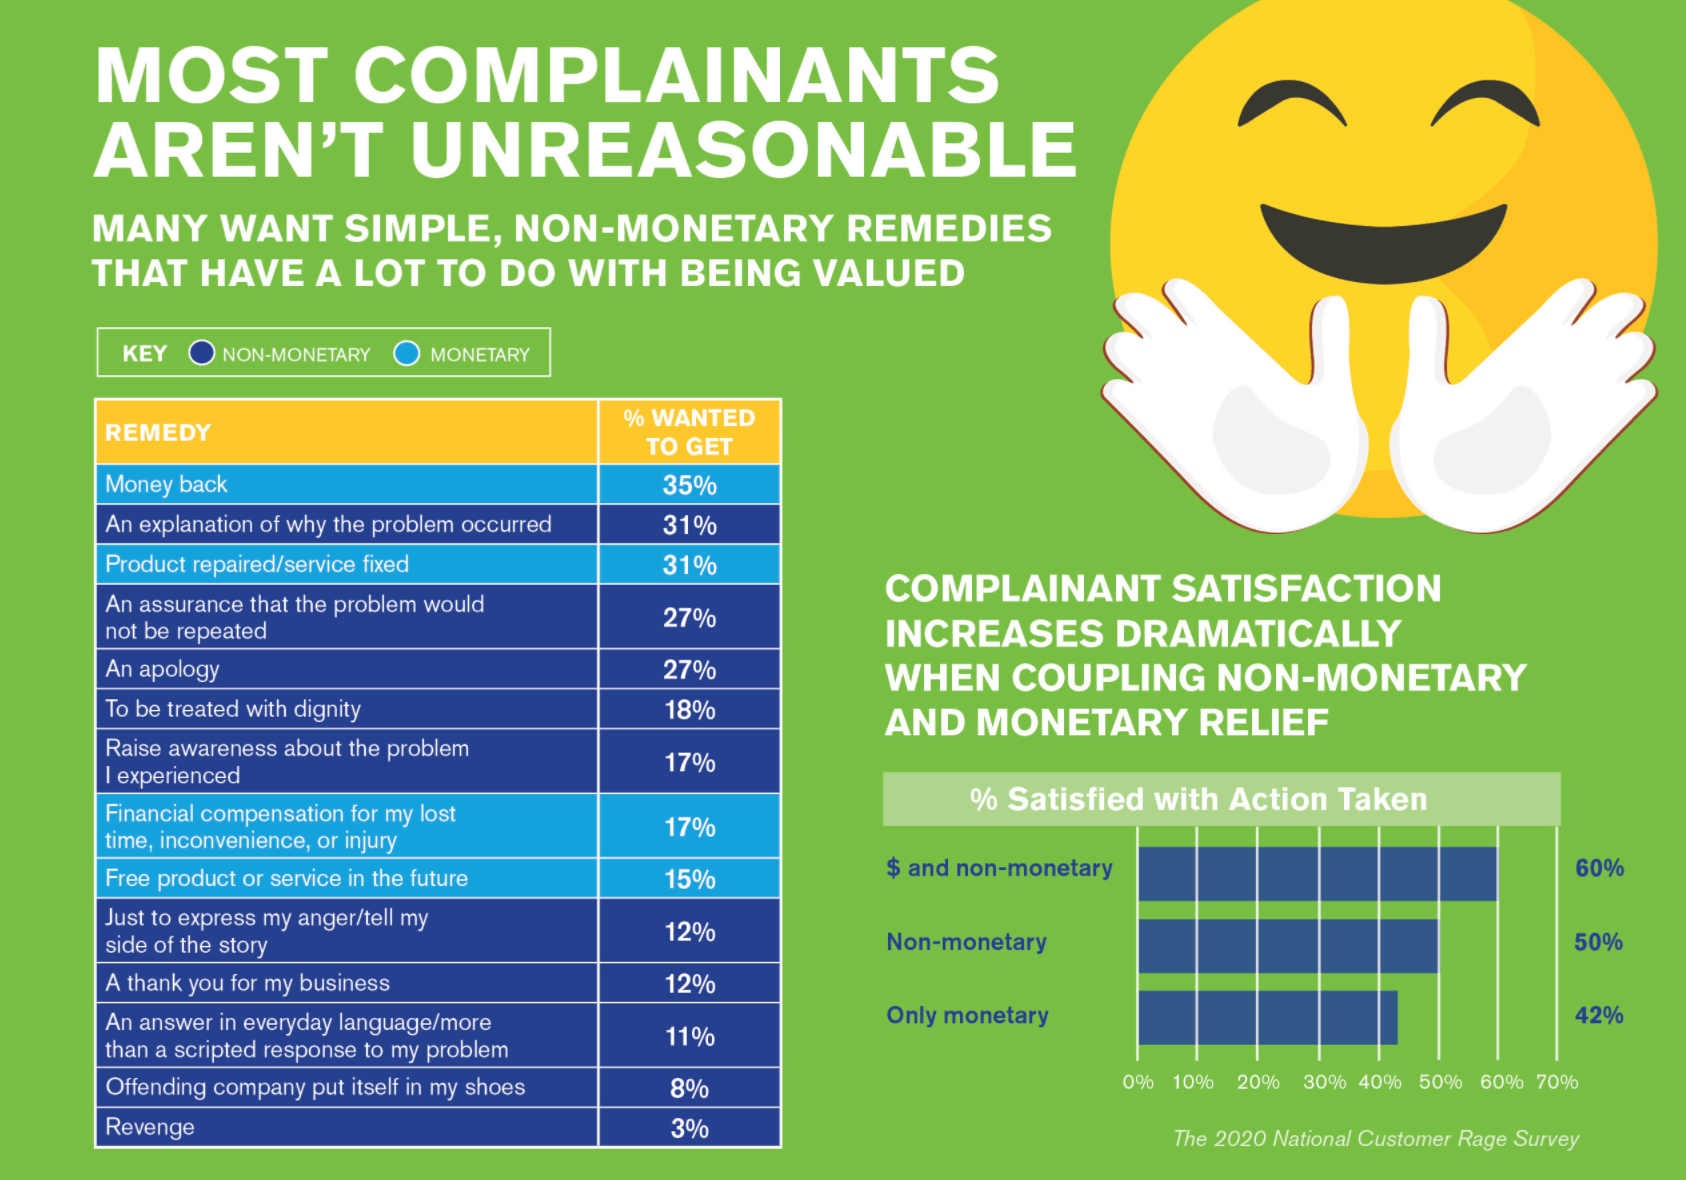 Learn what customers really complain about